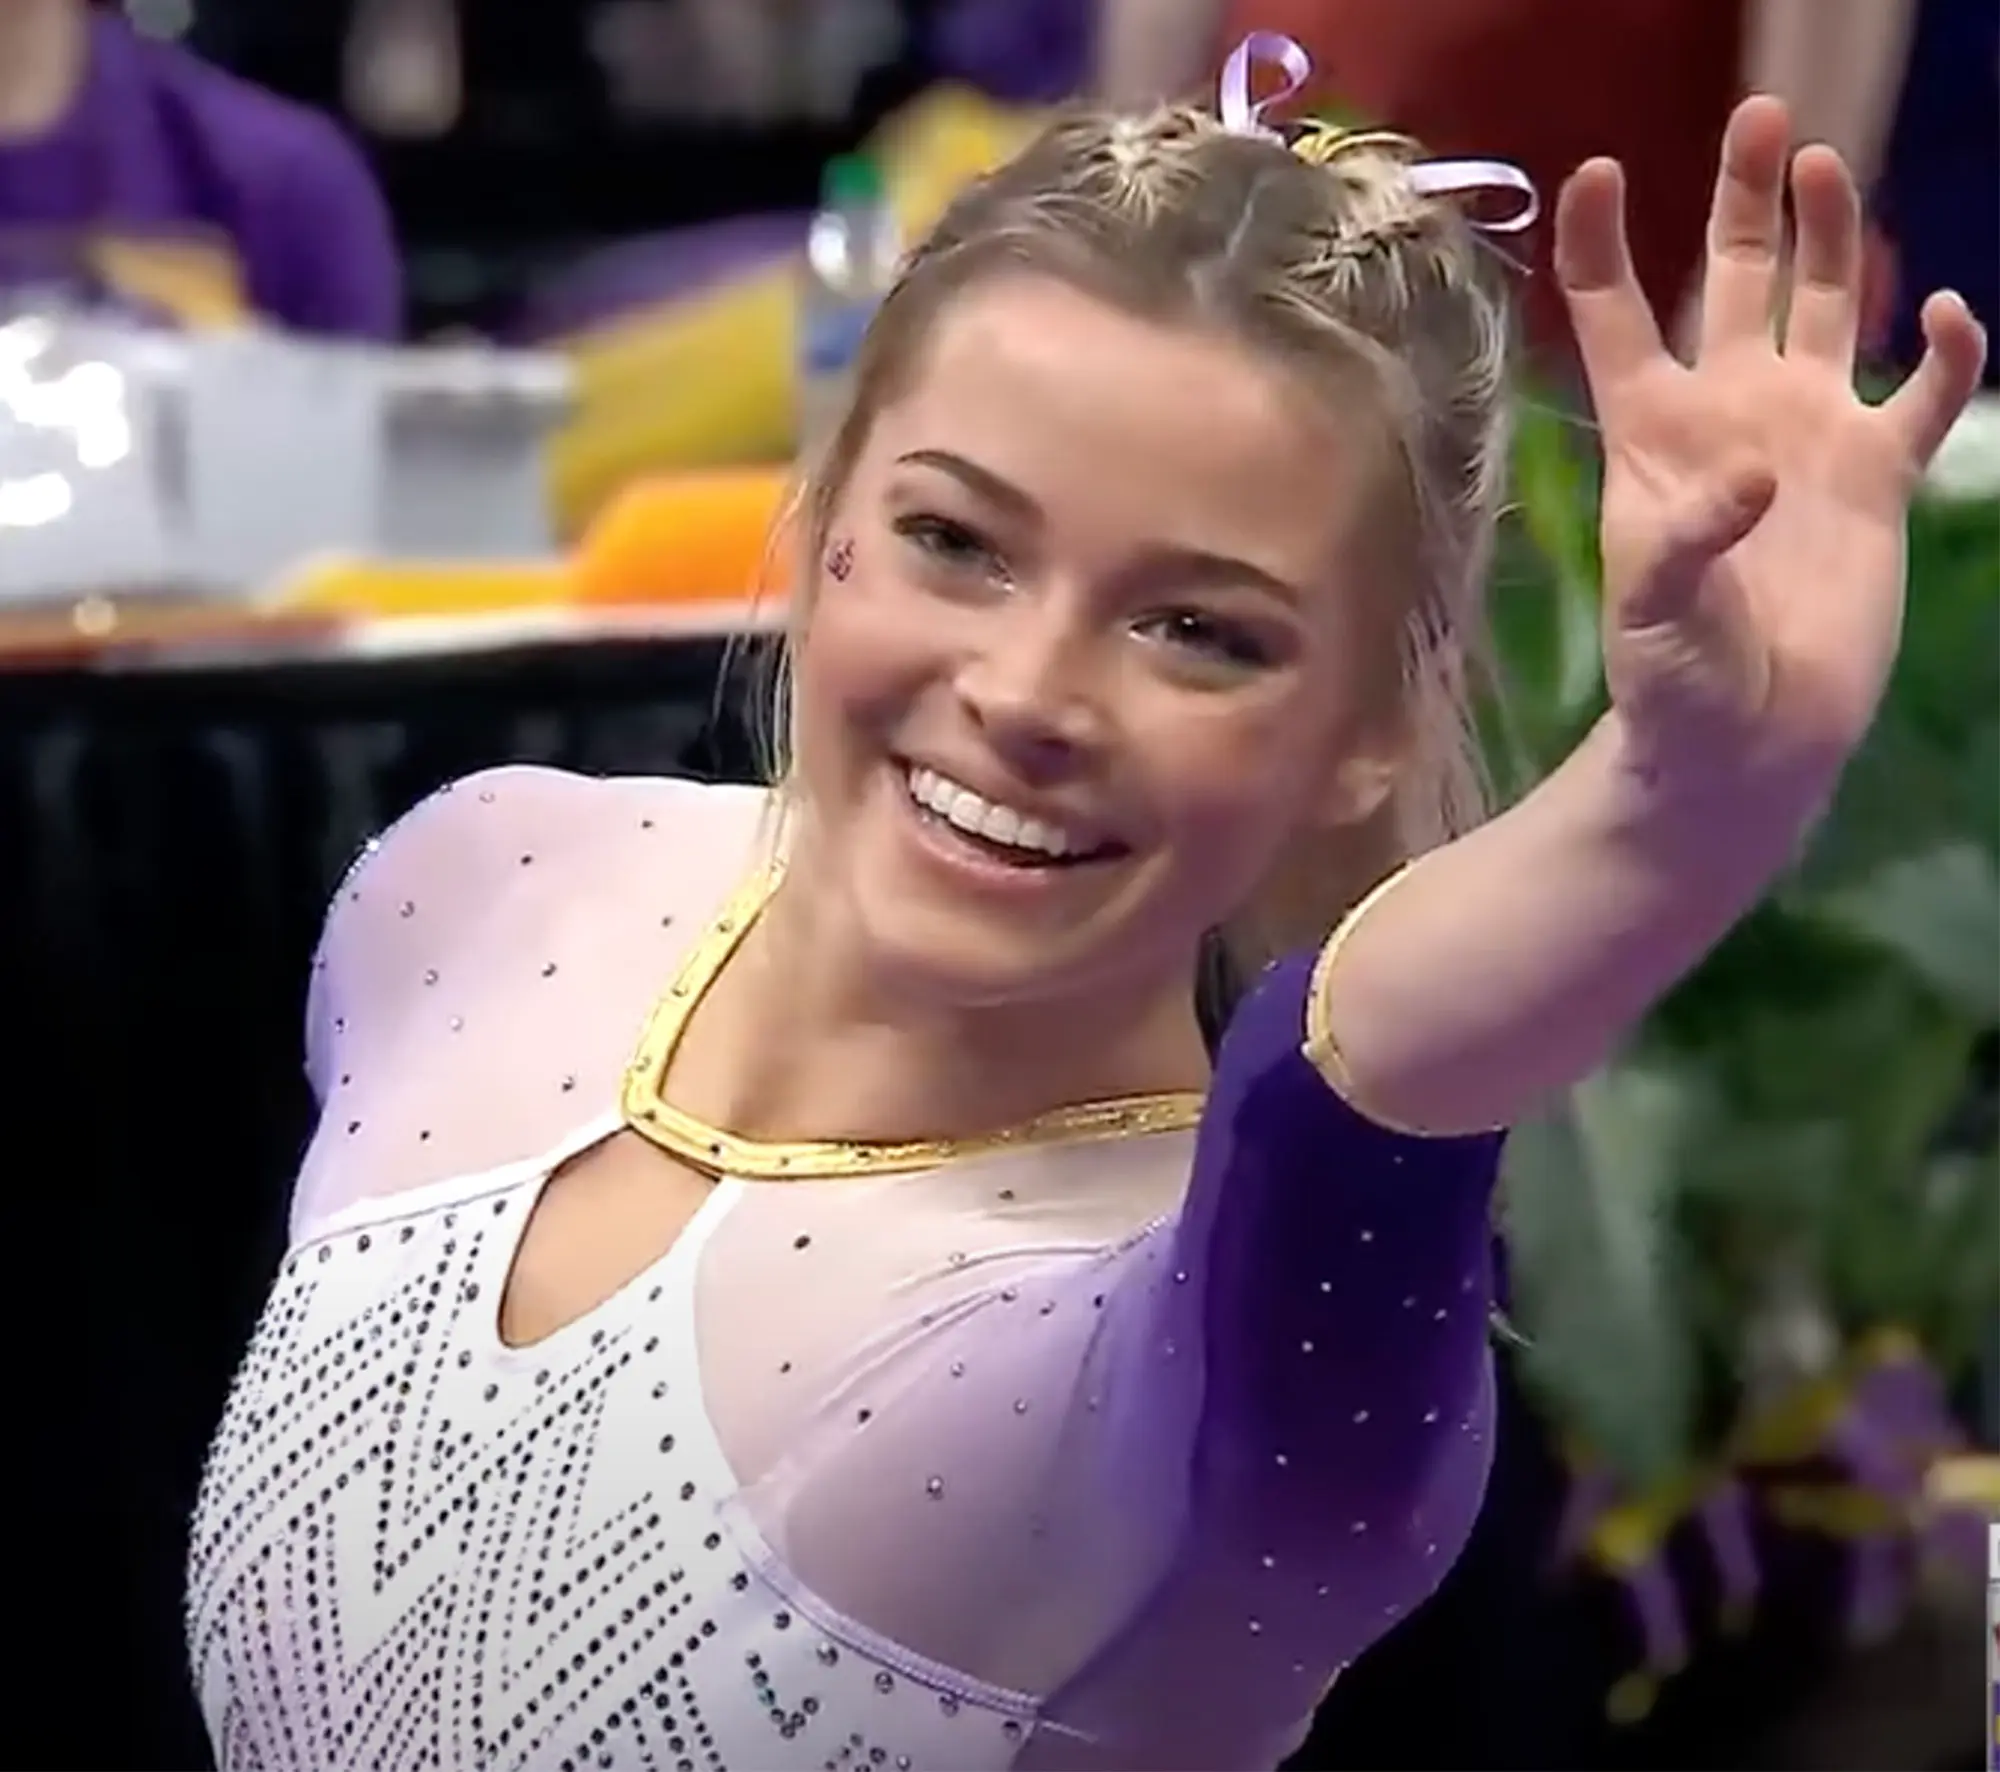 LSU Gymnast Olivia Dunne Goes Viral For Flexibility Following Her Floor Routine Performance